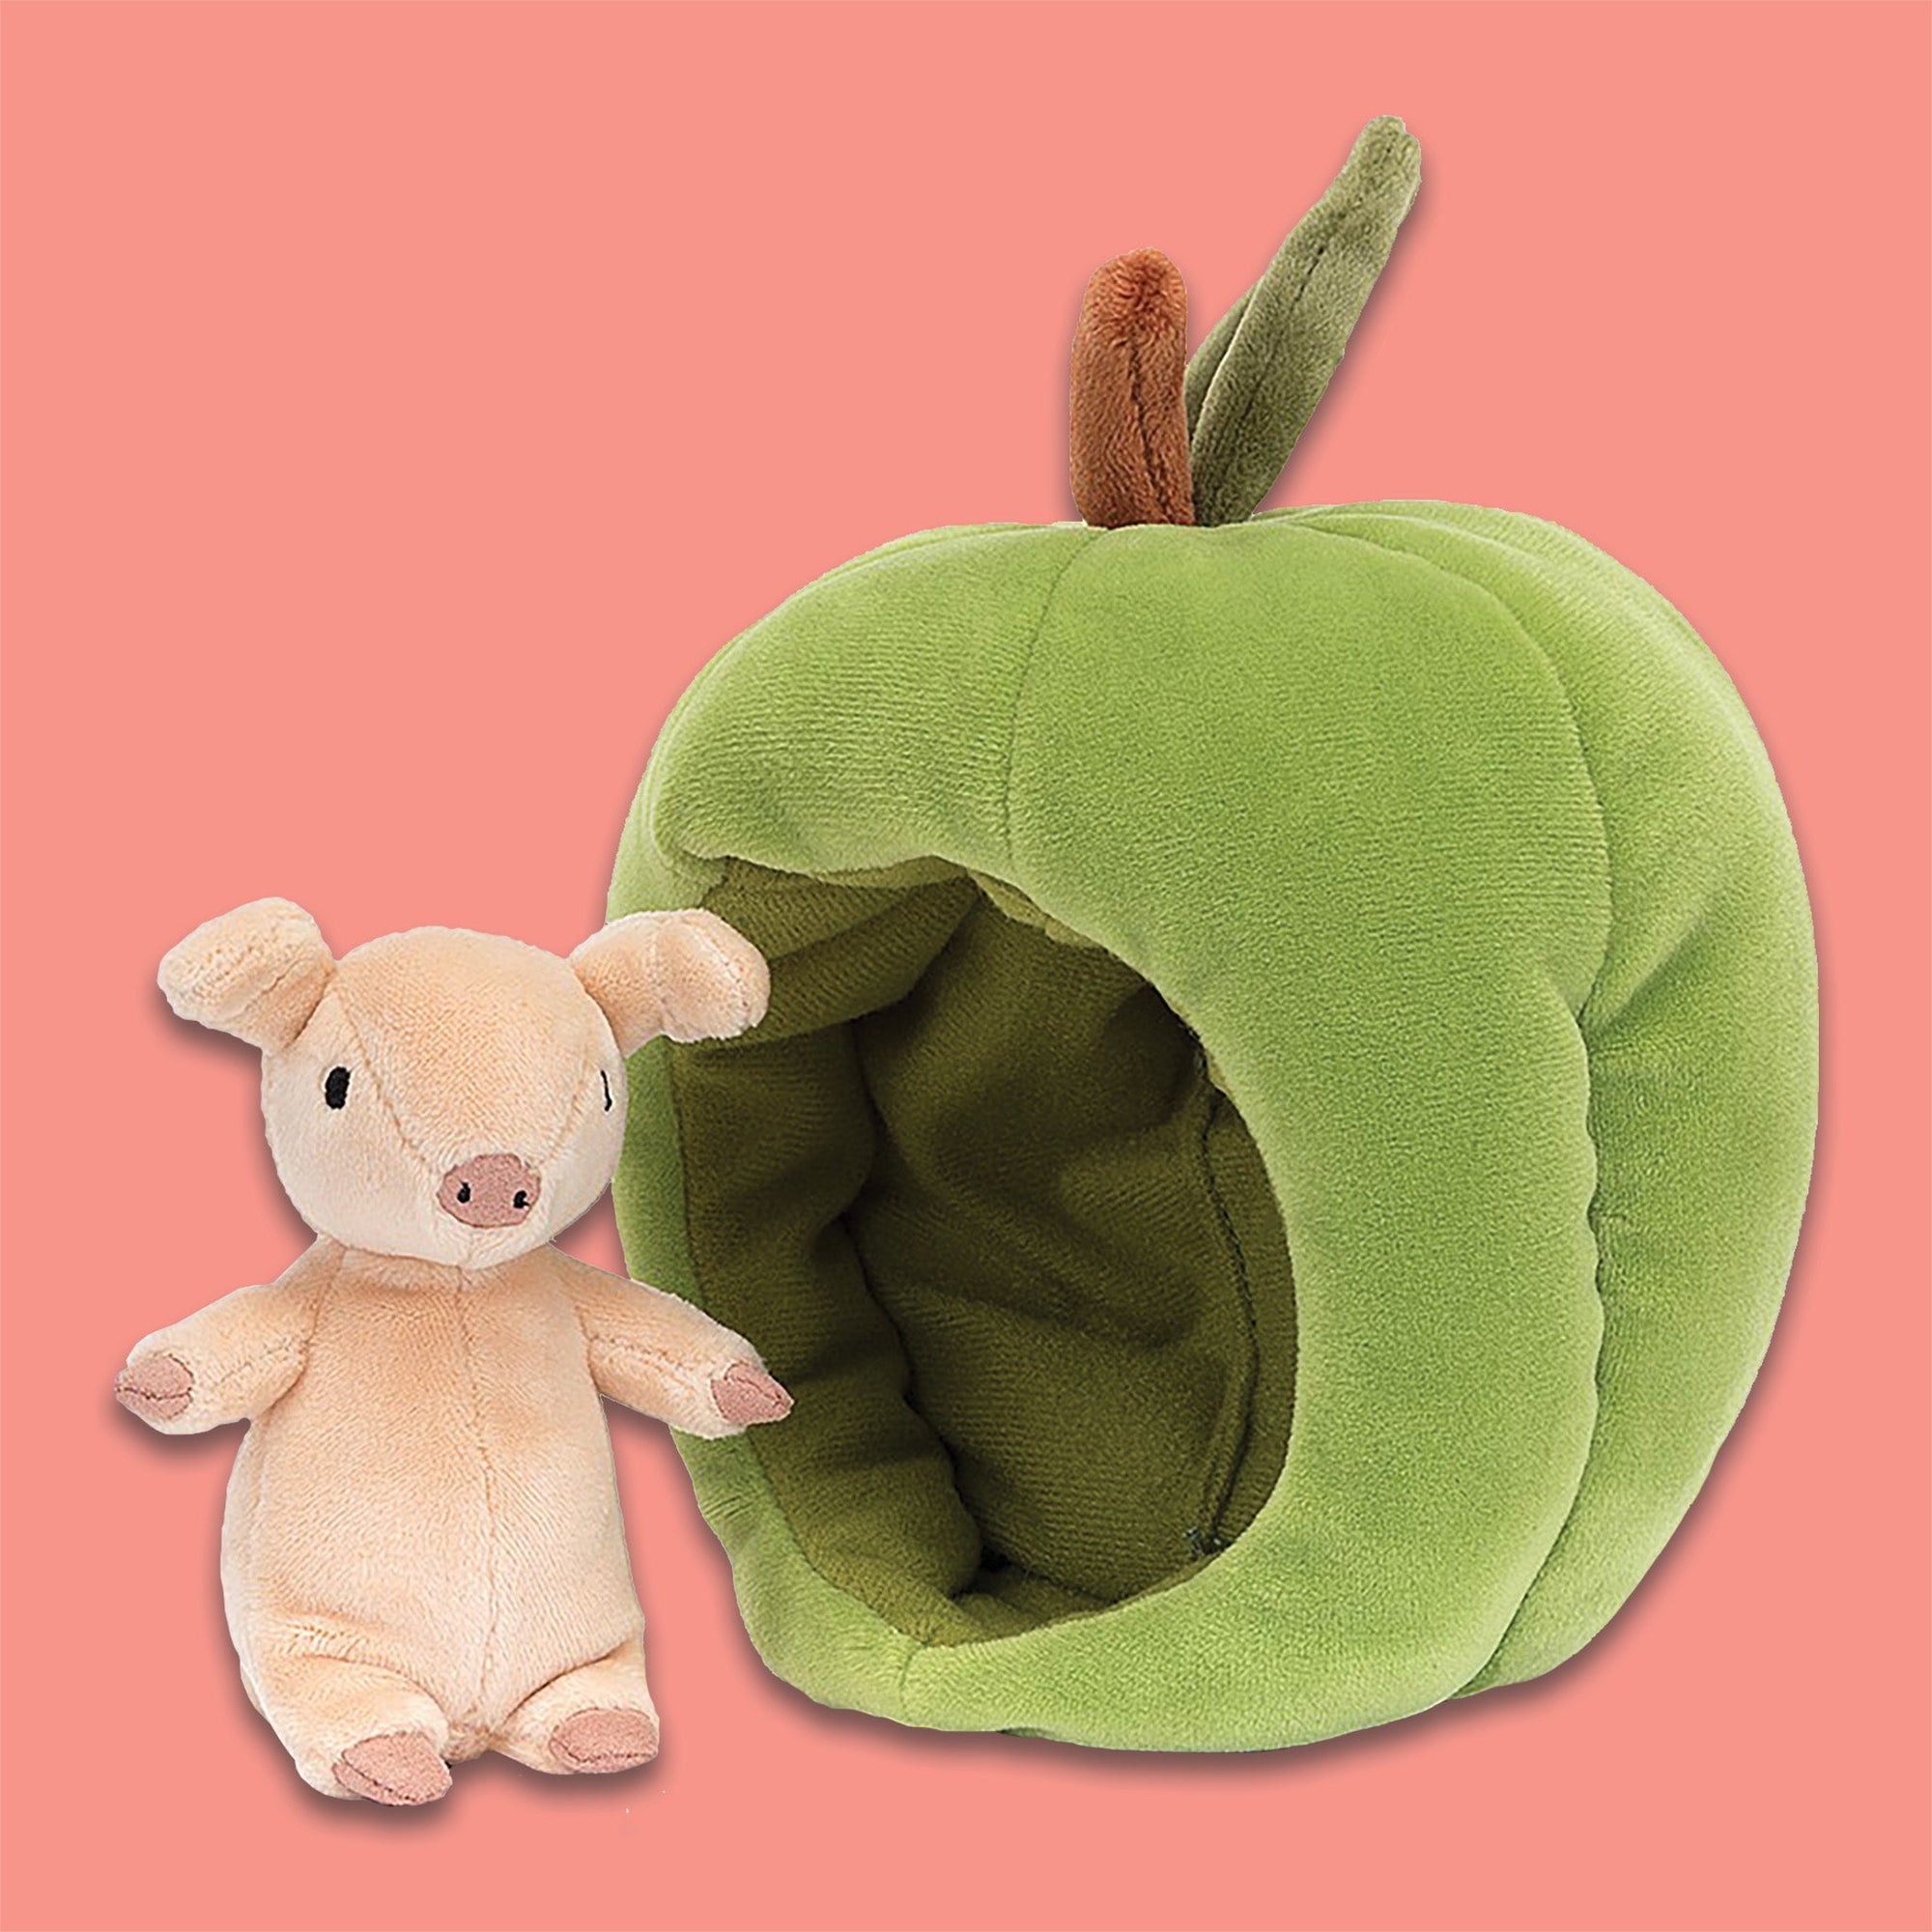 On a coral backgrounds sits a Jellycat Brambling Pig beside a green apple. This apple is stretchy-soft and cozily lined, with a velvety leaf on top. The pig is peach and has the softest fur.